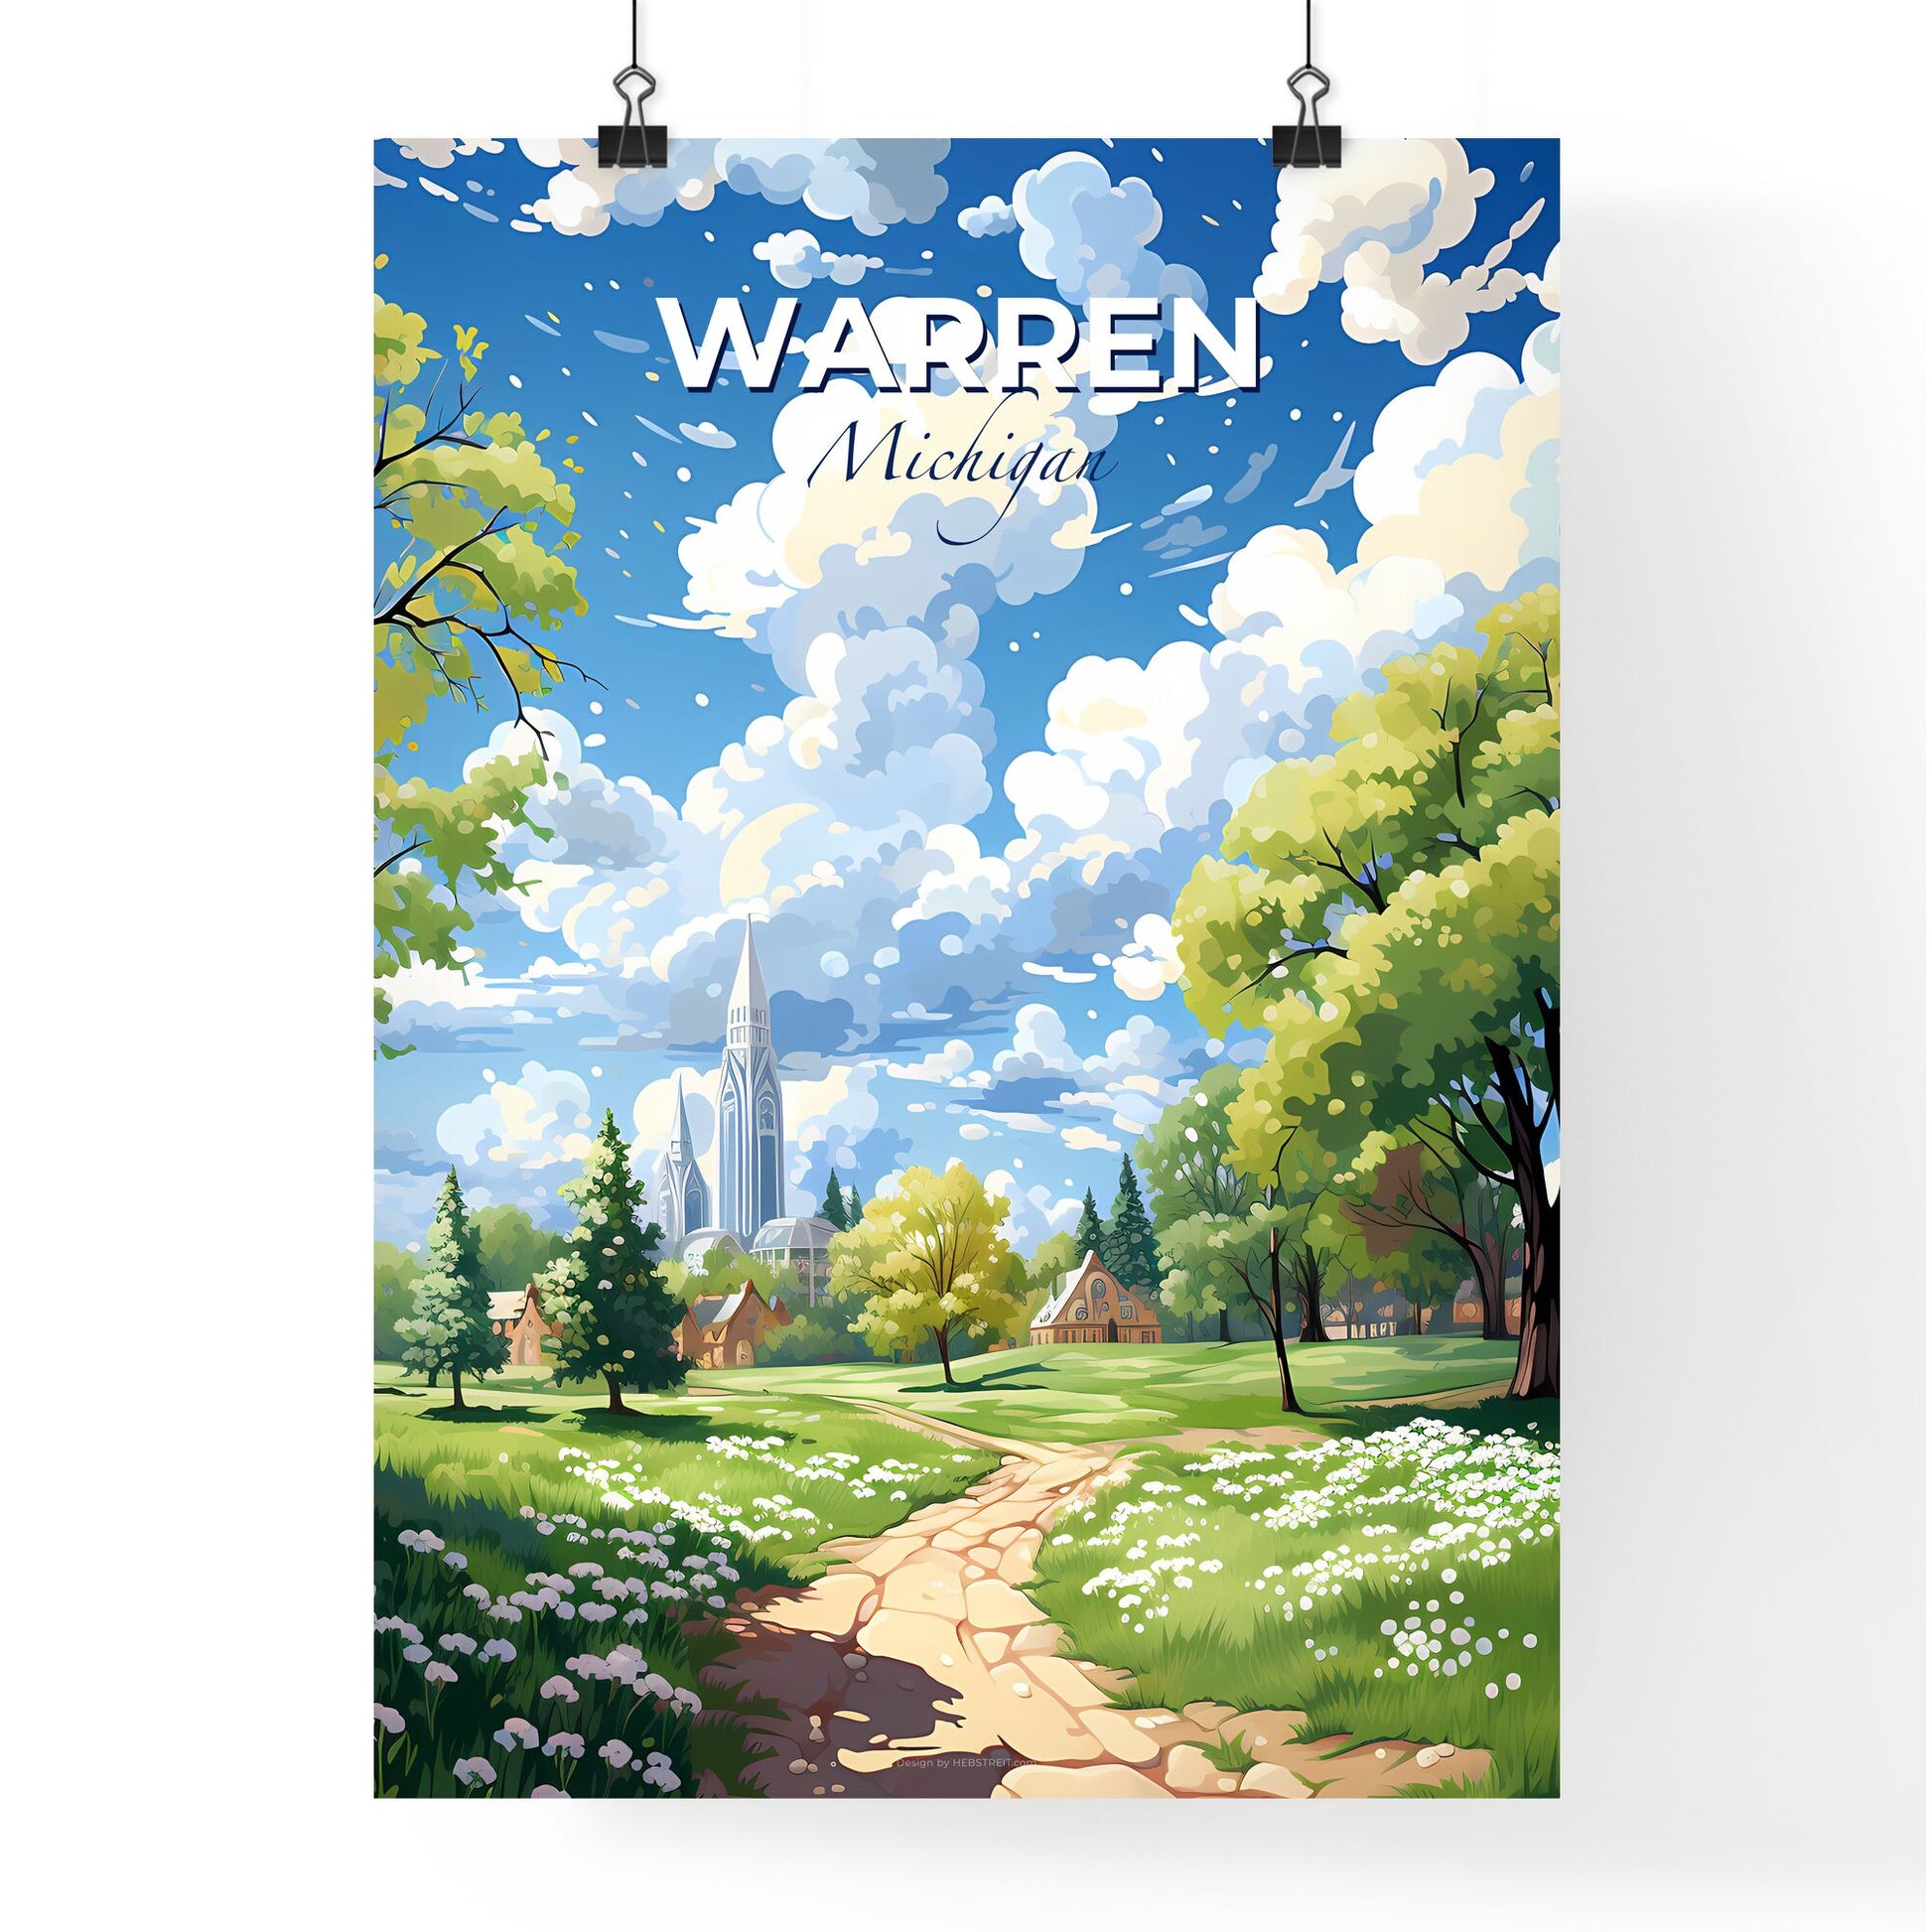 Warren, Michigan, A Poster of a landscape with a path and trees and buildings Default Title